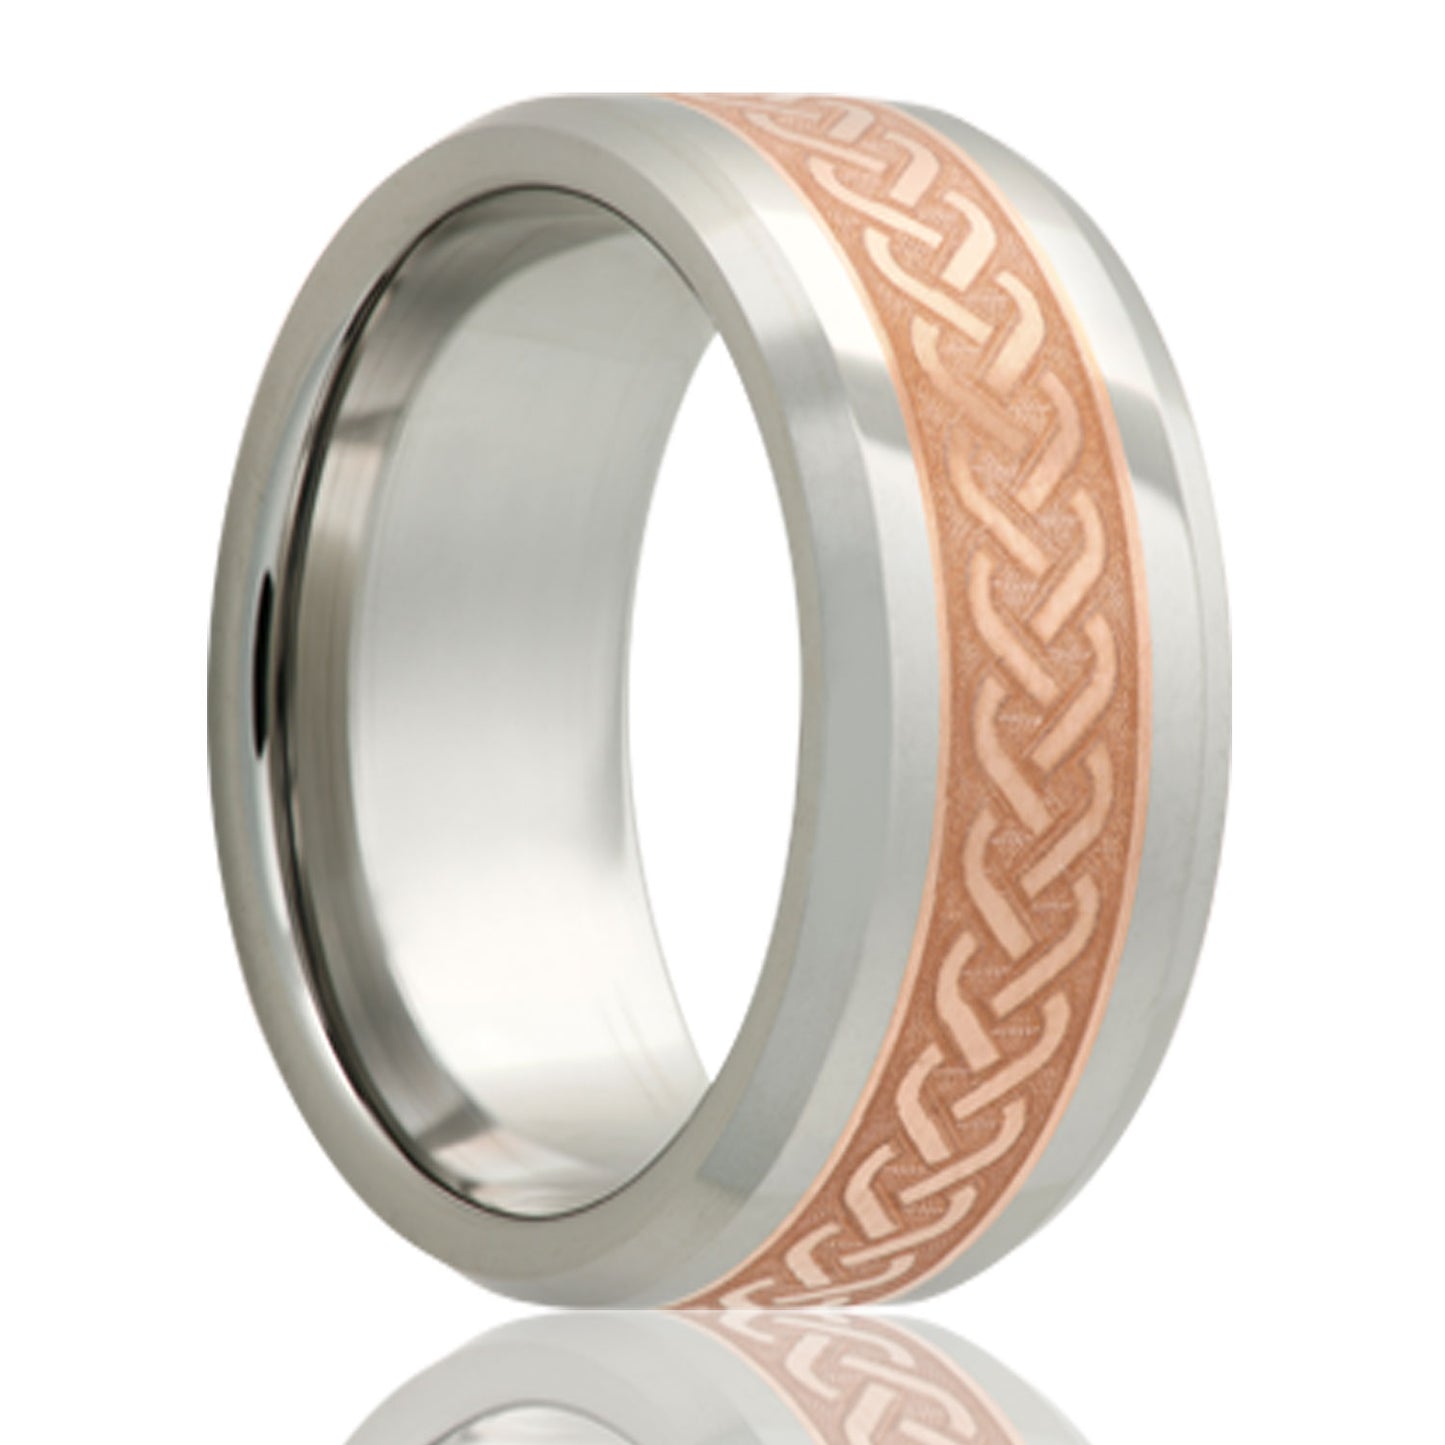 A celtic pattern copper inlay tungsten men's wedding band with beveled edges displayed on a neutral white background.